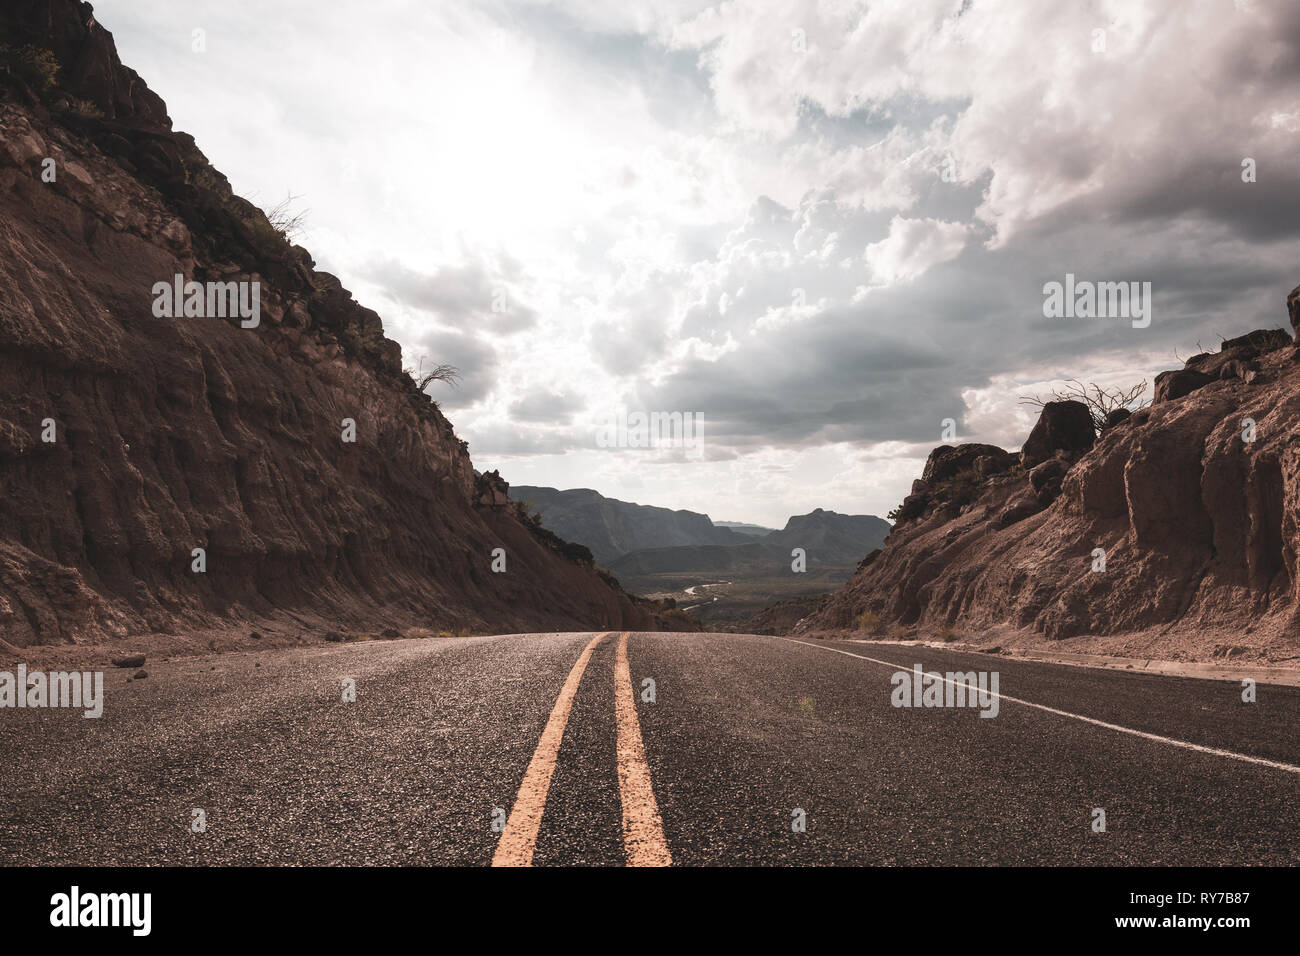 Passage through the desert mountains of Big Bend, Texas as a storm rolls in. Stock Photo